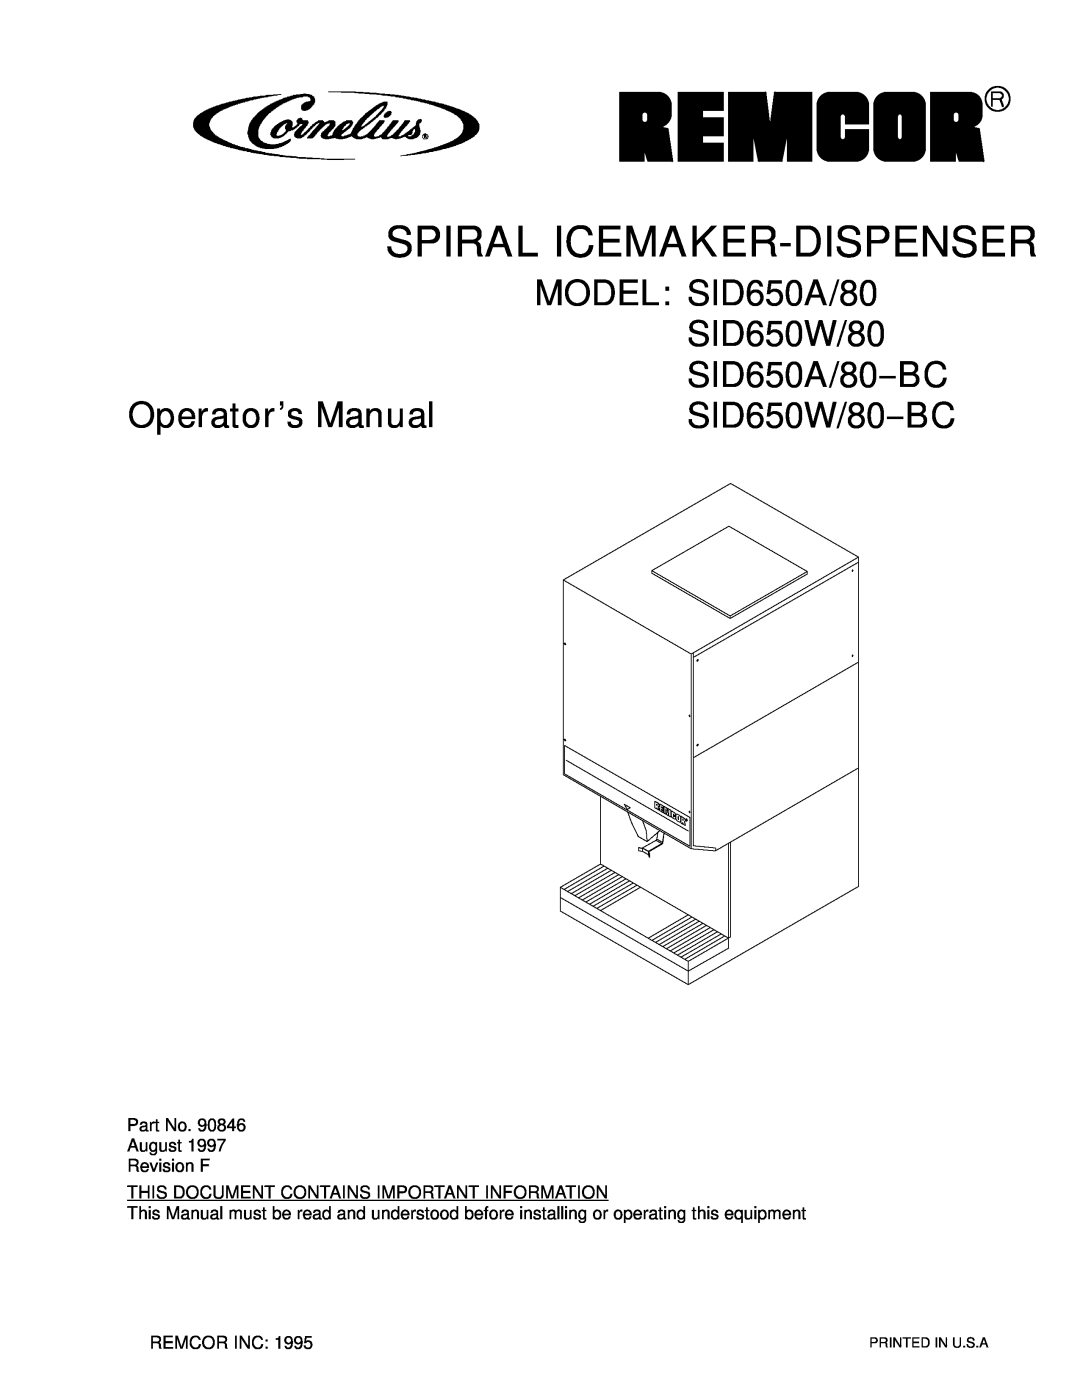 Everpure manual Spiral Icemaker-Dispenser, MODEL SID650A/80, Operator’s Manual, SID650A/80--BC, SID650W/80--BC 